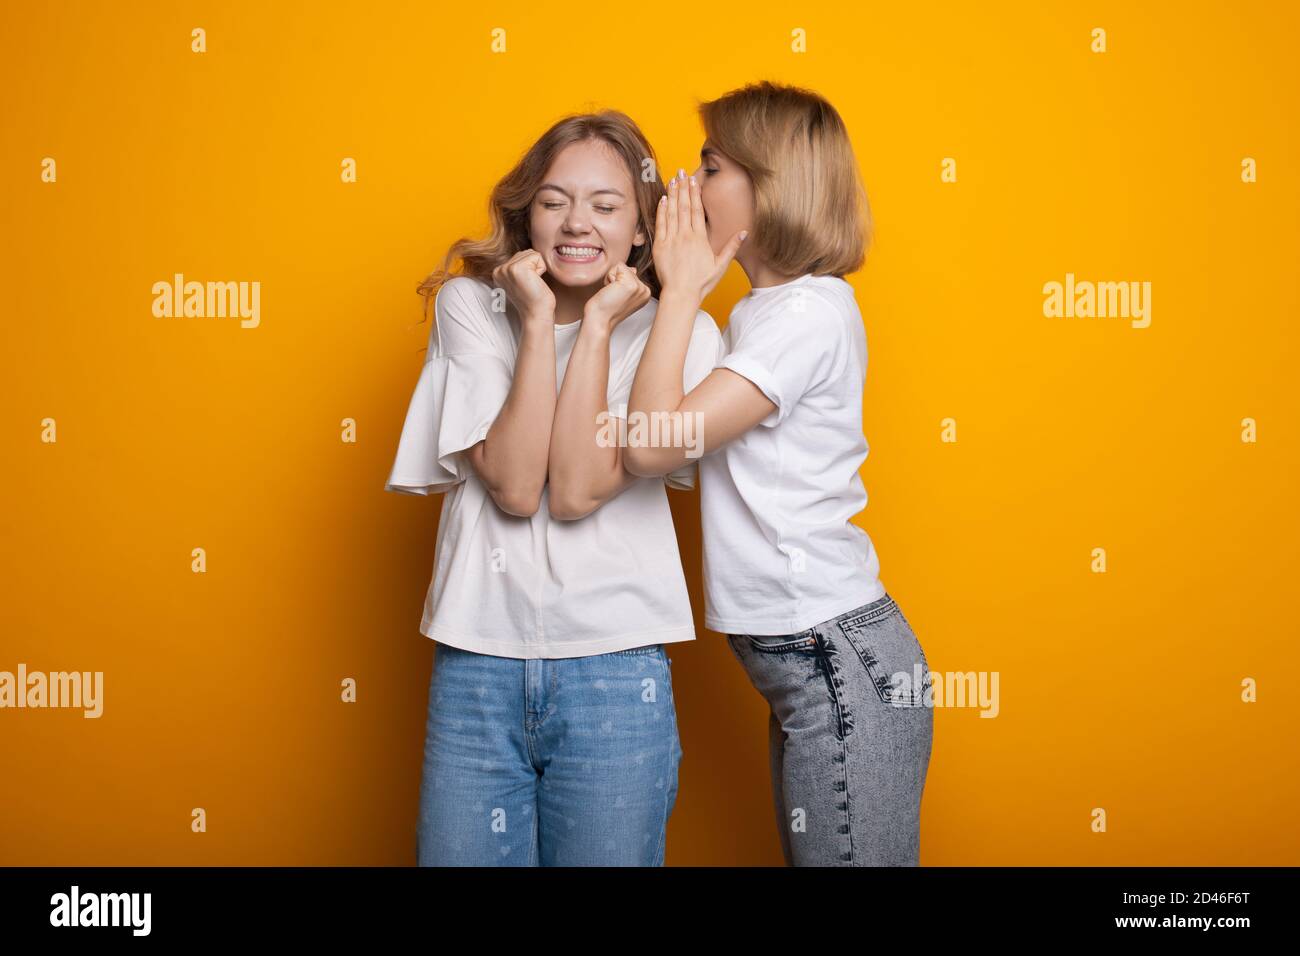 Blonde caucasian woman is whispering something to her friend posing in casual clothes on a yellow studio wall Stock Photo